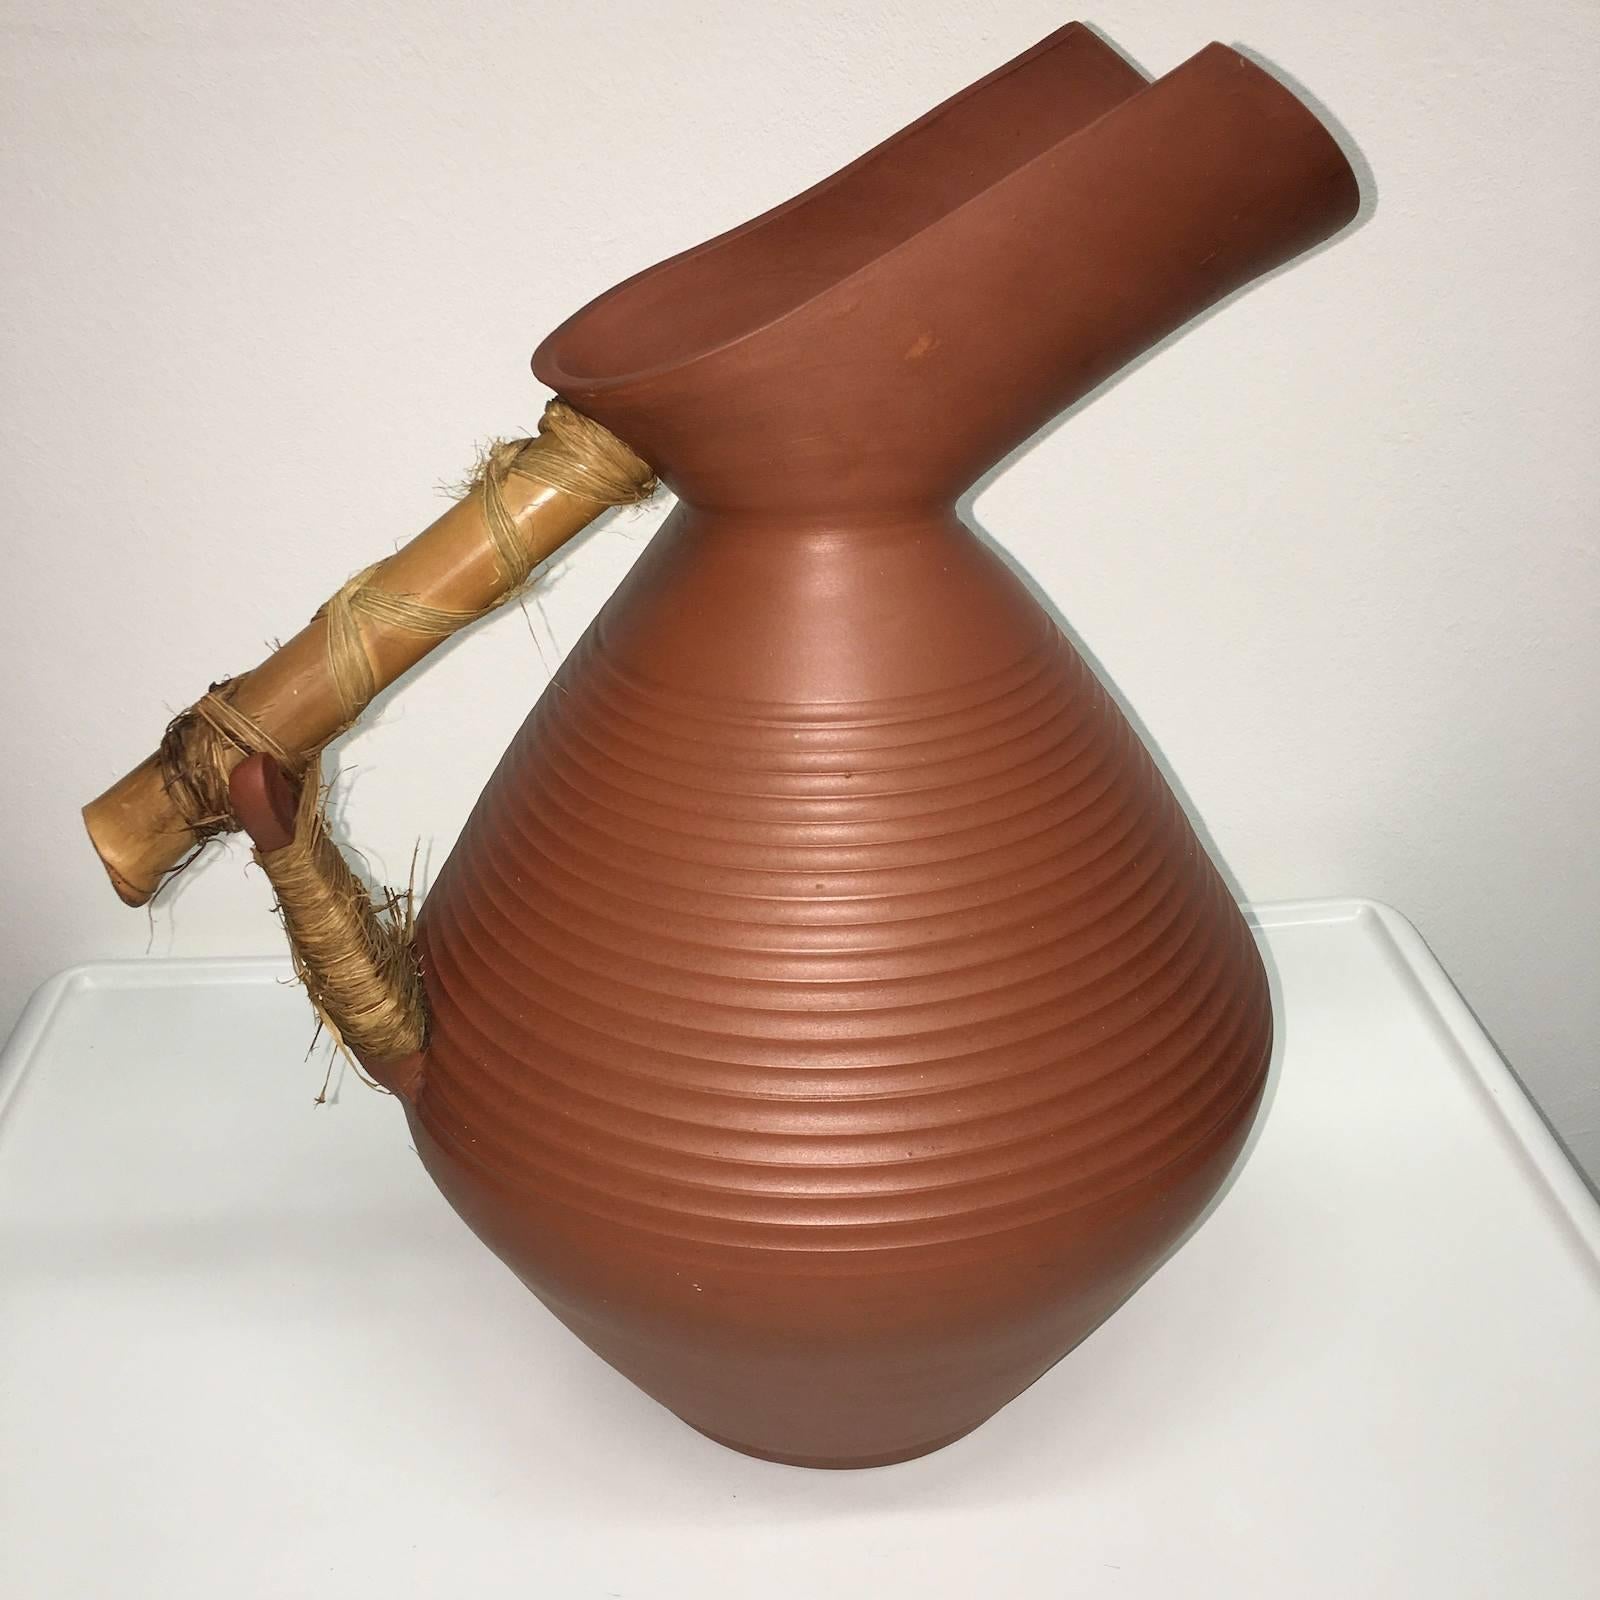 Lovely vintage 1950's Jug style vase pottery made of natural terracotta clay. Marked 71/40 form number as well as being labeled 